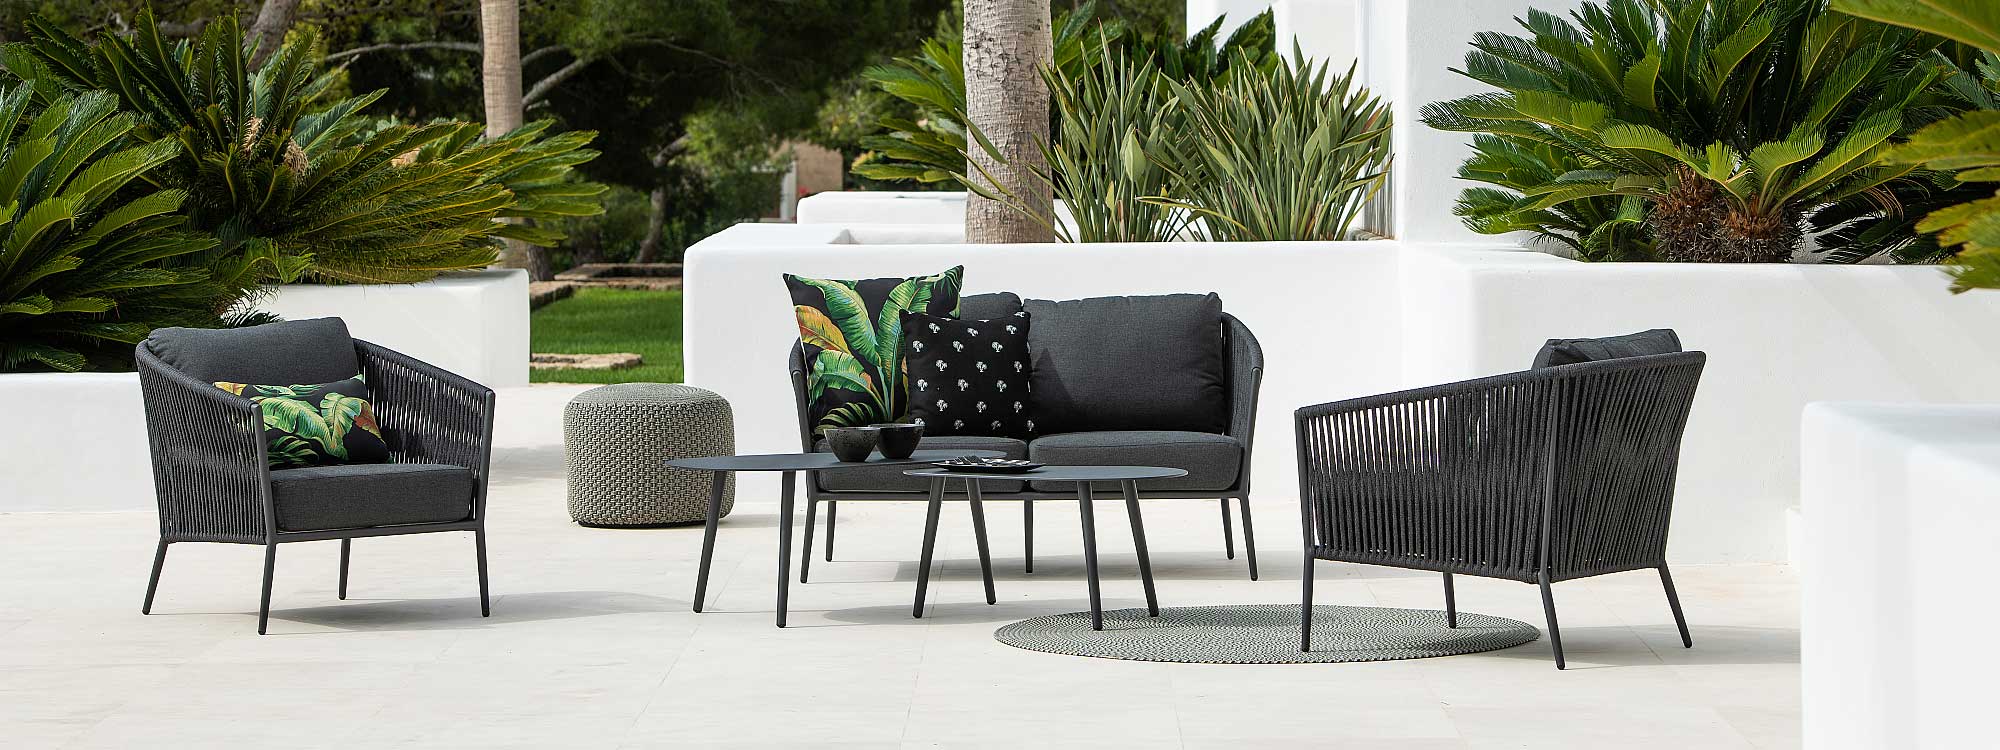 Image of Fortuna Rope outdoor lounge furniture in charcoal black, shown on white-washed terrace surrounded by small palms and bird of paradise plants